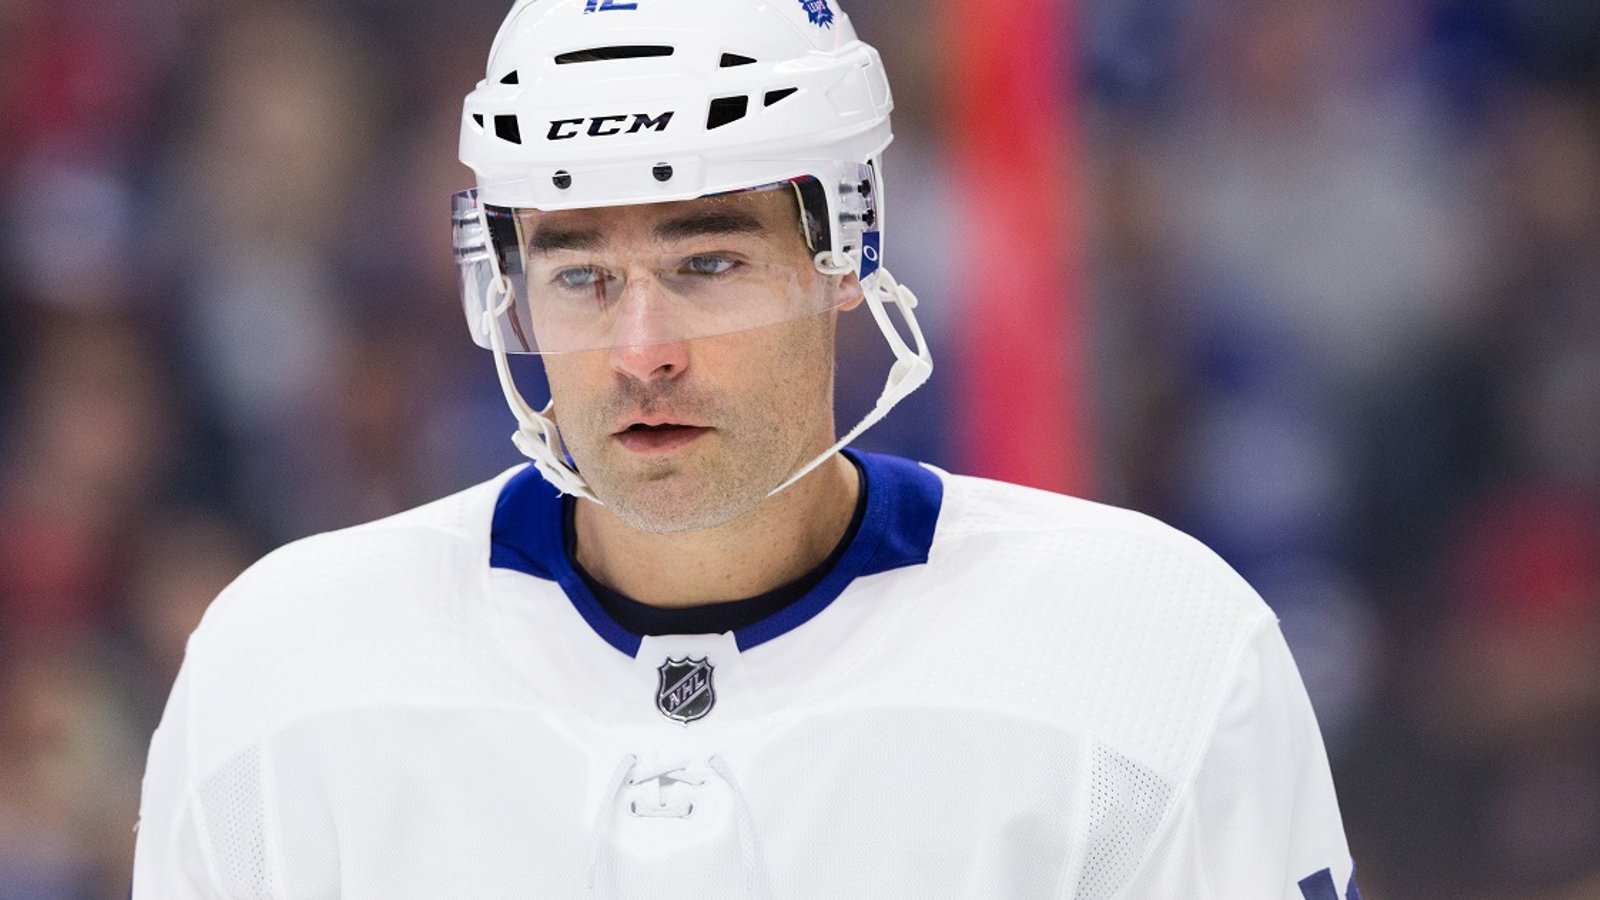 Rumor: The San Jose Sharks want nothing to do with Patrick Marleau.